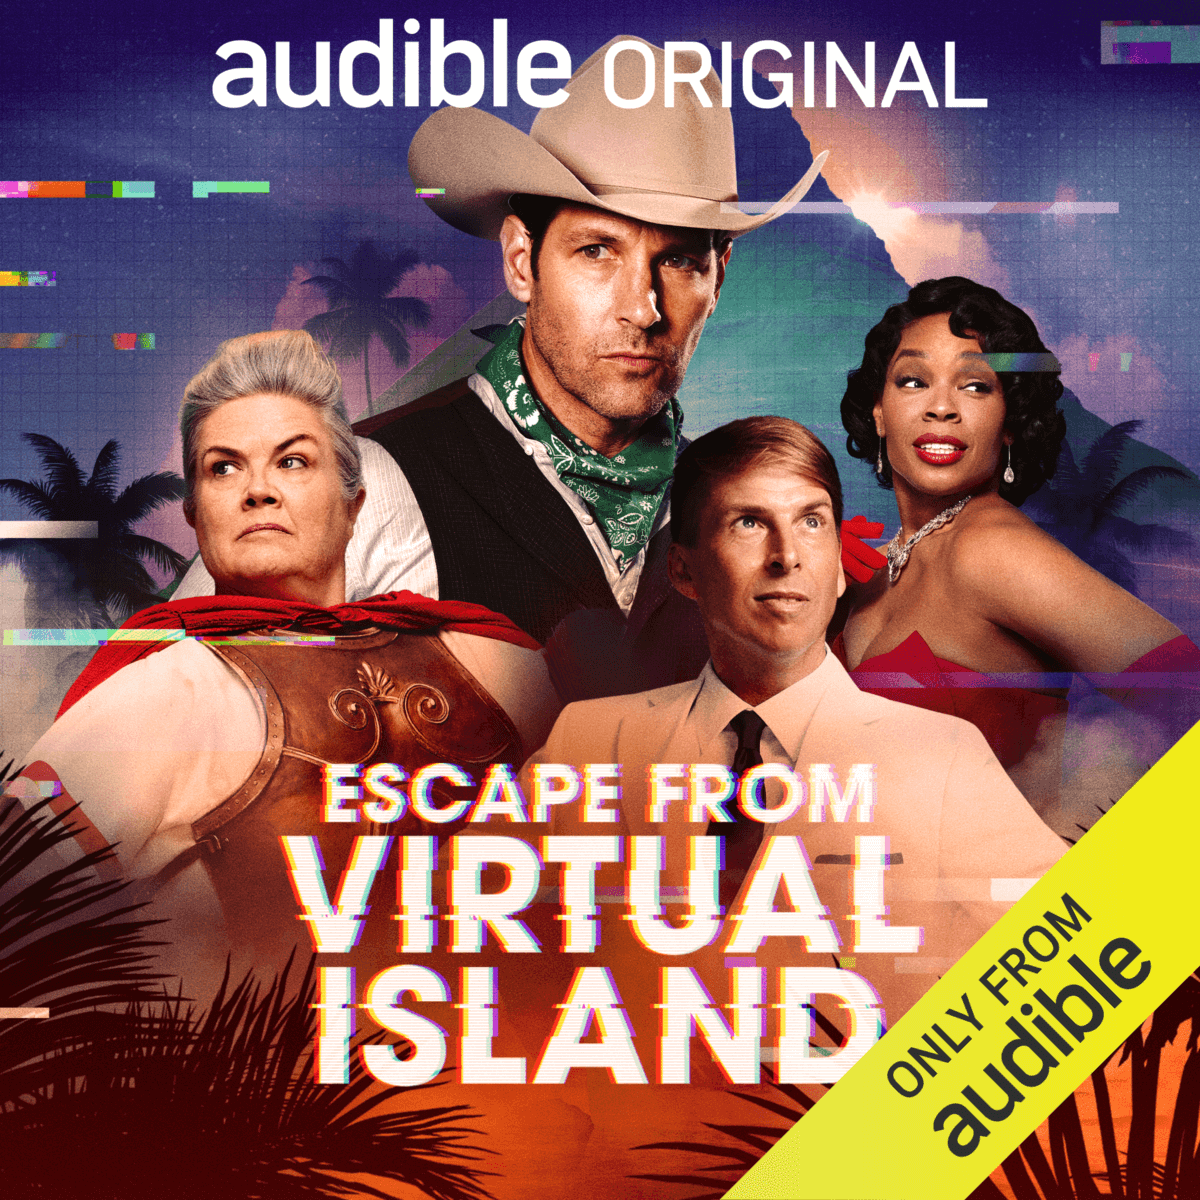 Audible-Original-Escape-from-Virtual-Island-cover-art-1200x1200.png